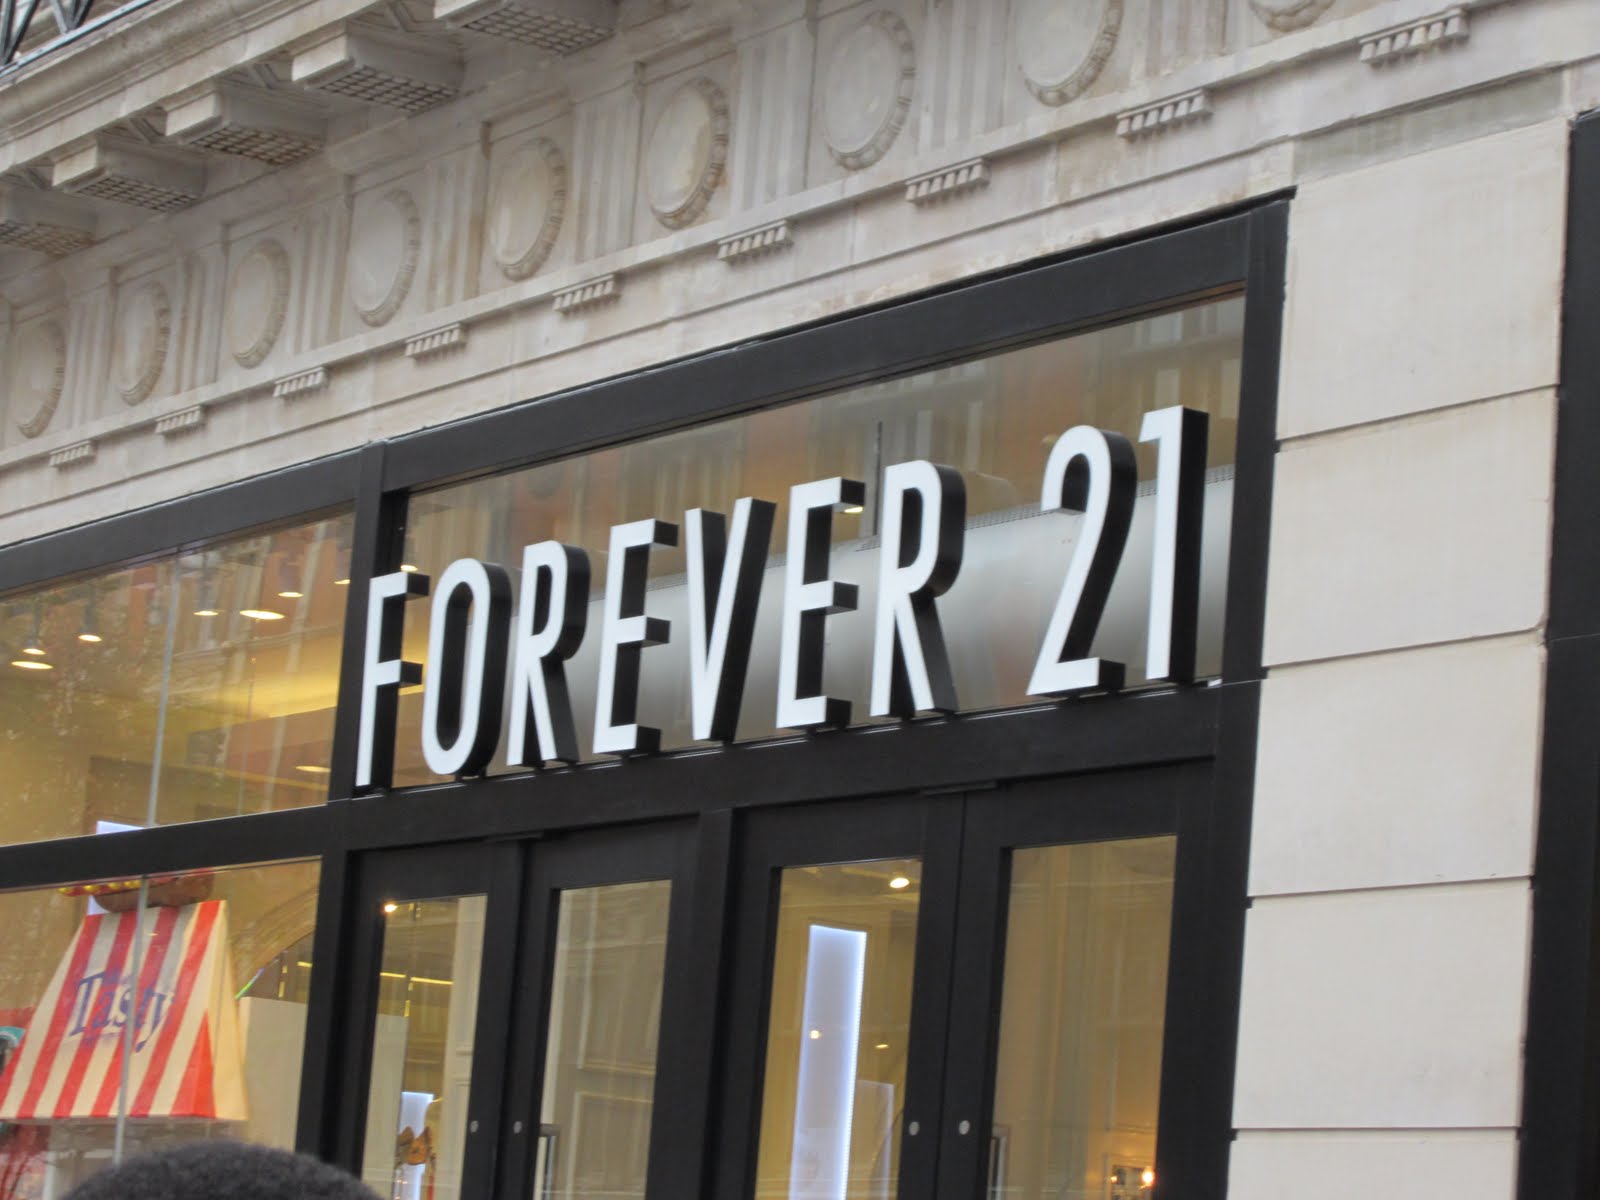 Through Annette's Lens: FOREVER 21 COMES TO LONDON OXFORD STREET